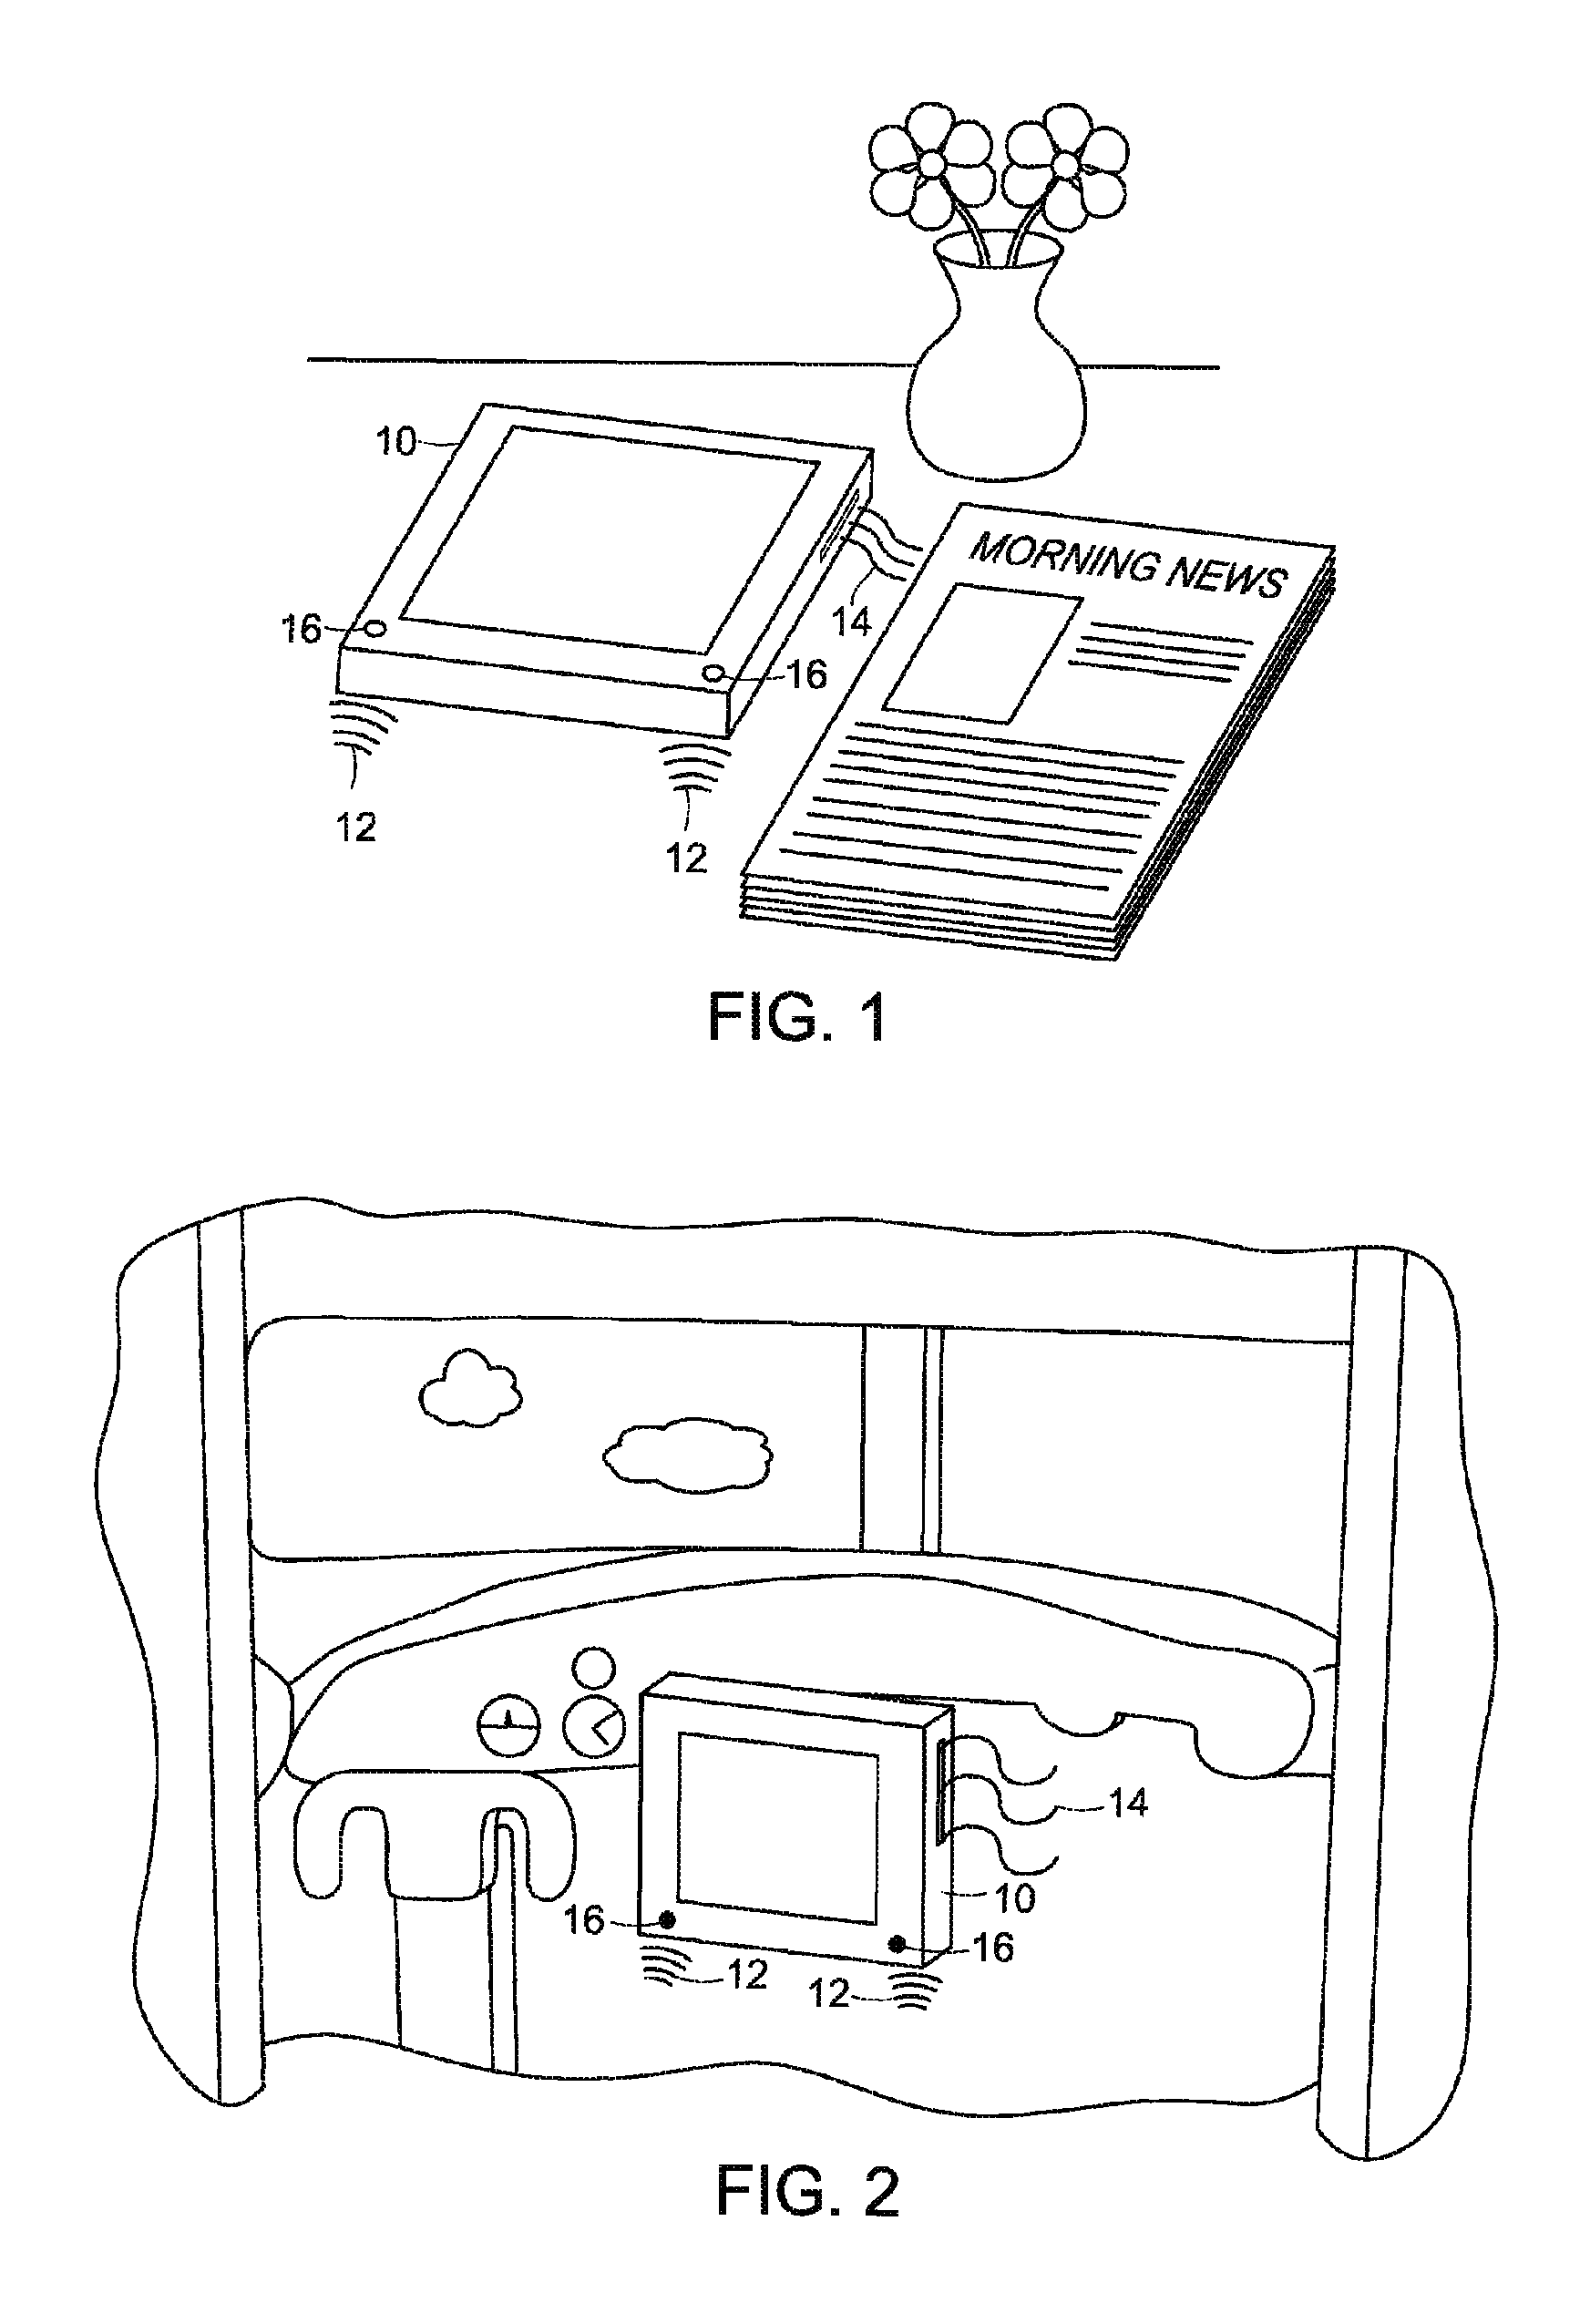 Ambient noise level sampling system for cooling an electronic device